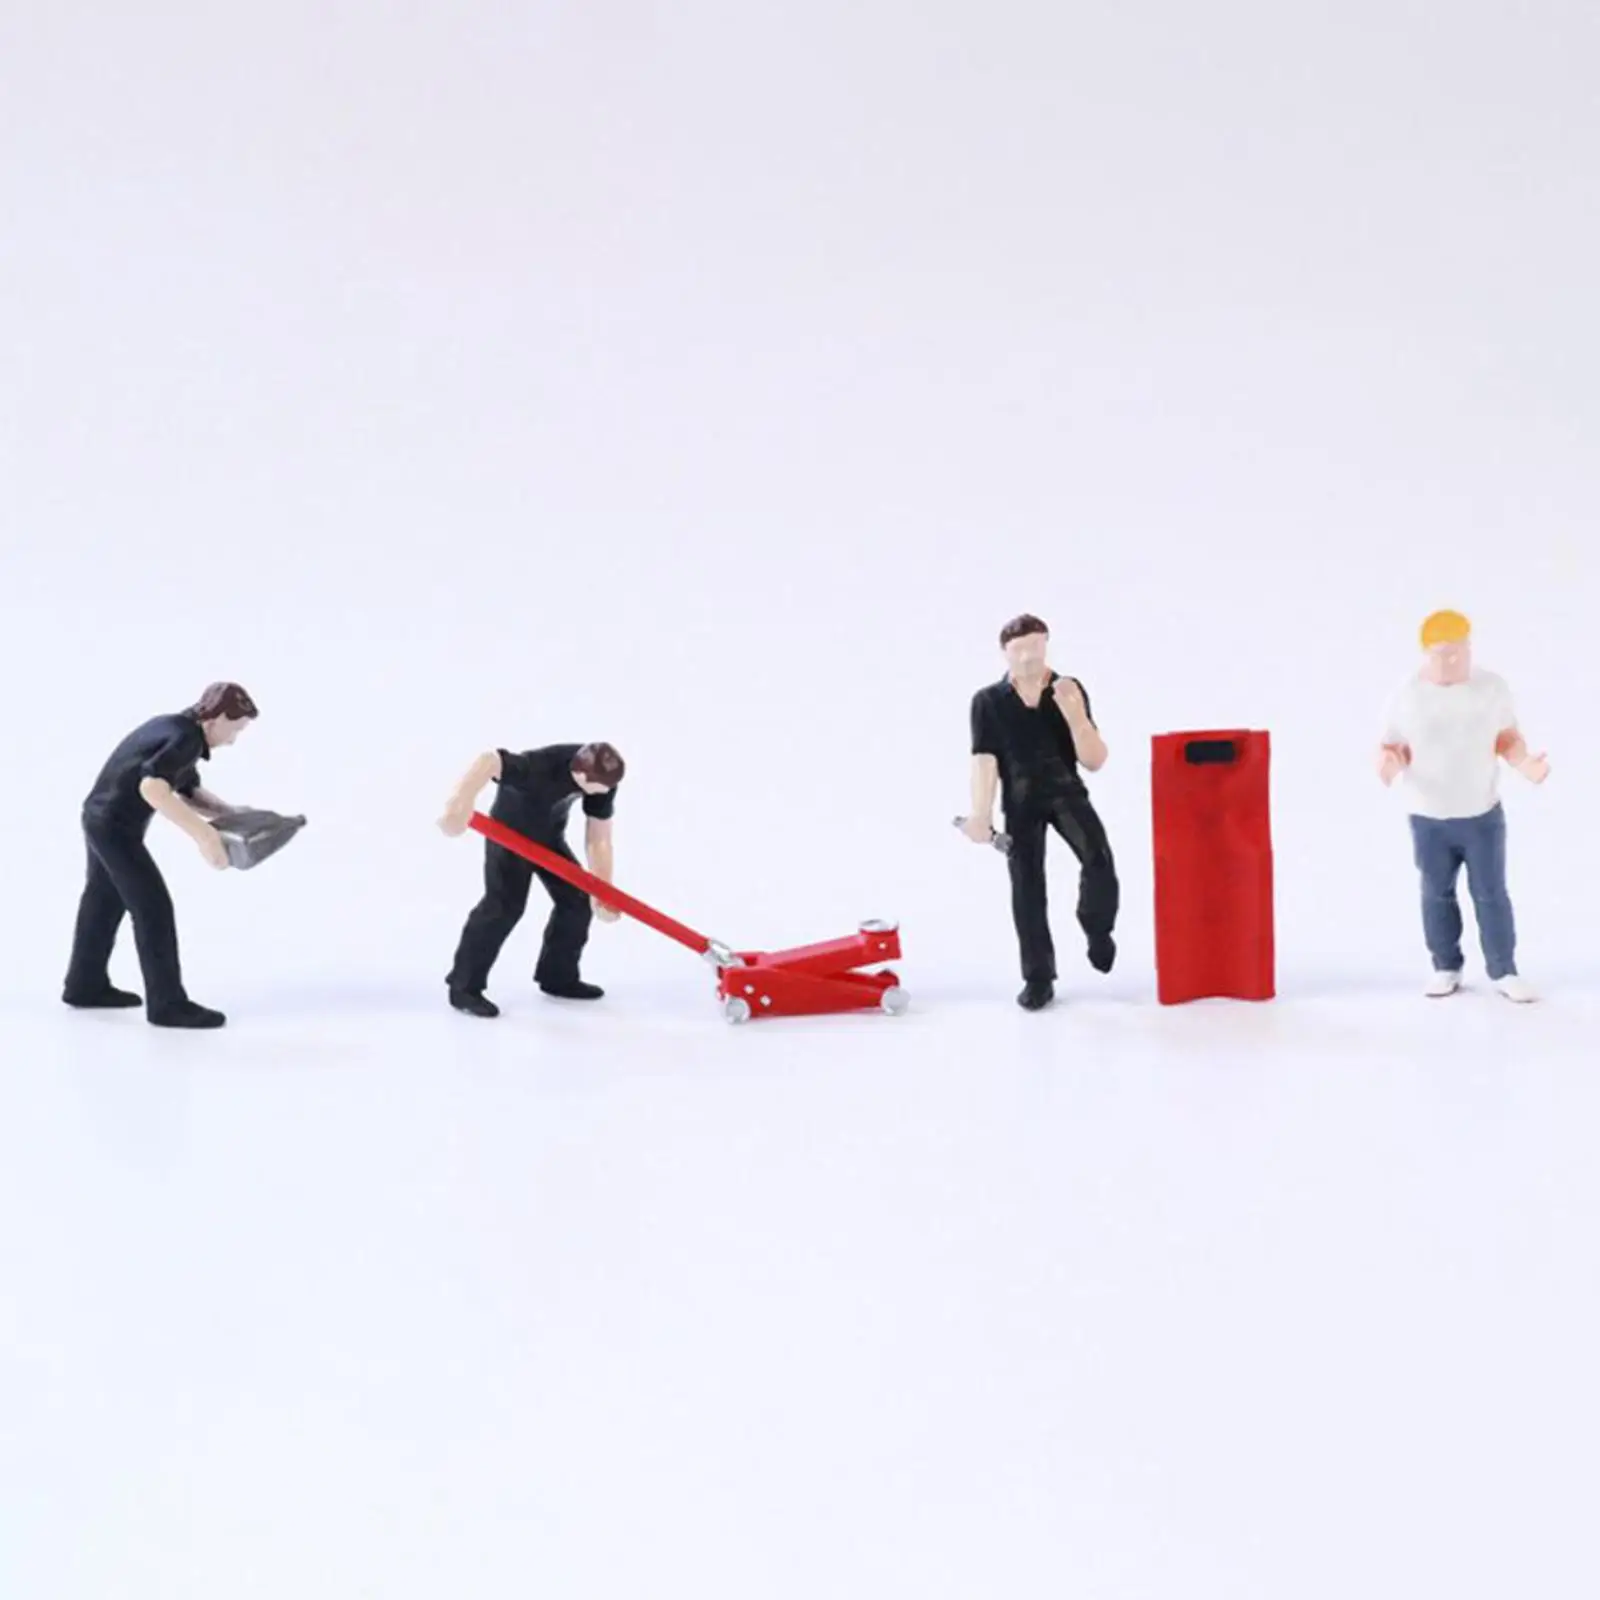 1/64 Scale Repairman Figure Role Play Resin Miniature Tiny People for Fairy Garden DIY Projects Railway Station Micro Landscape